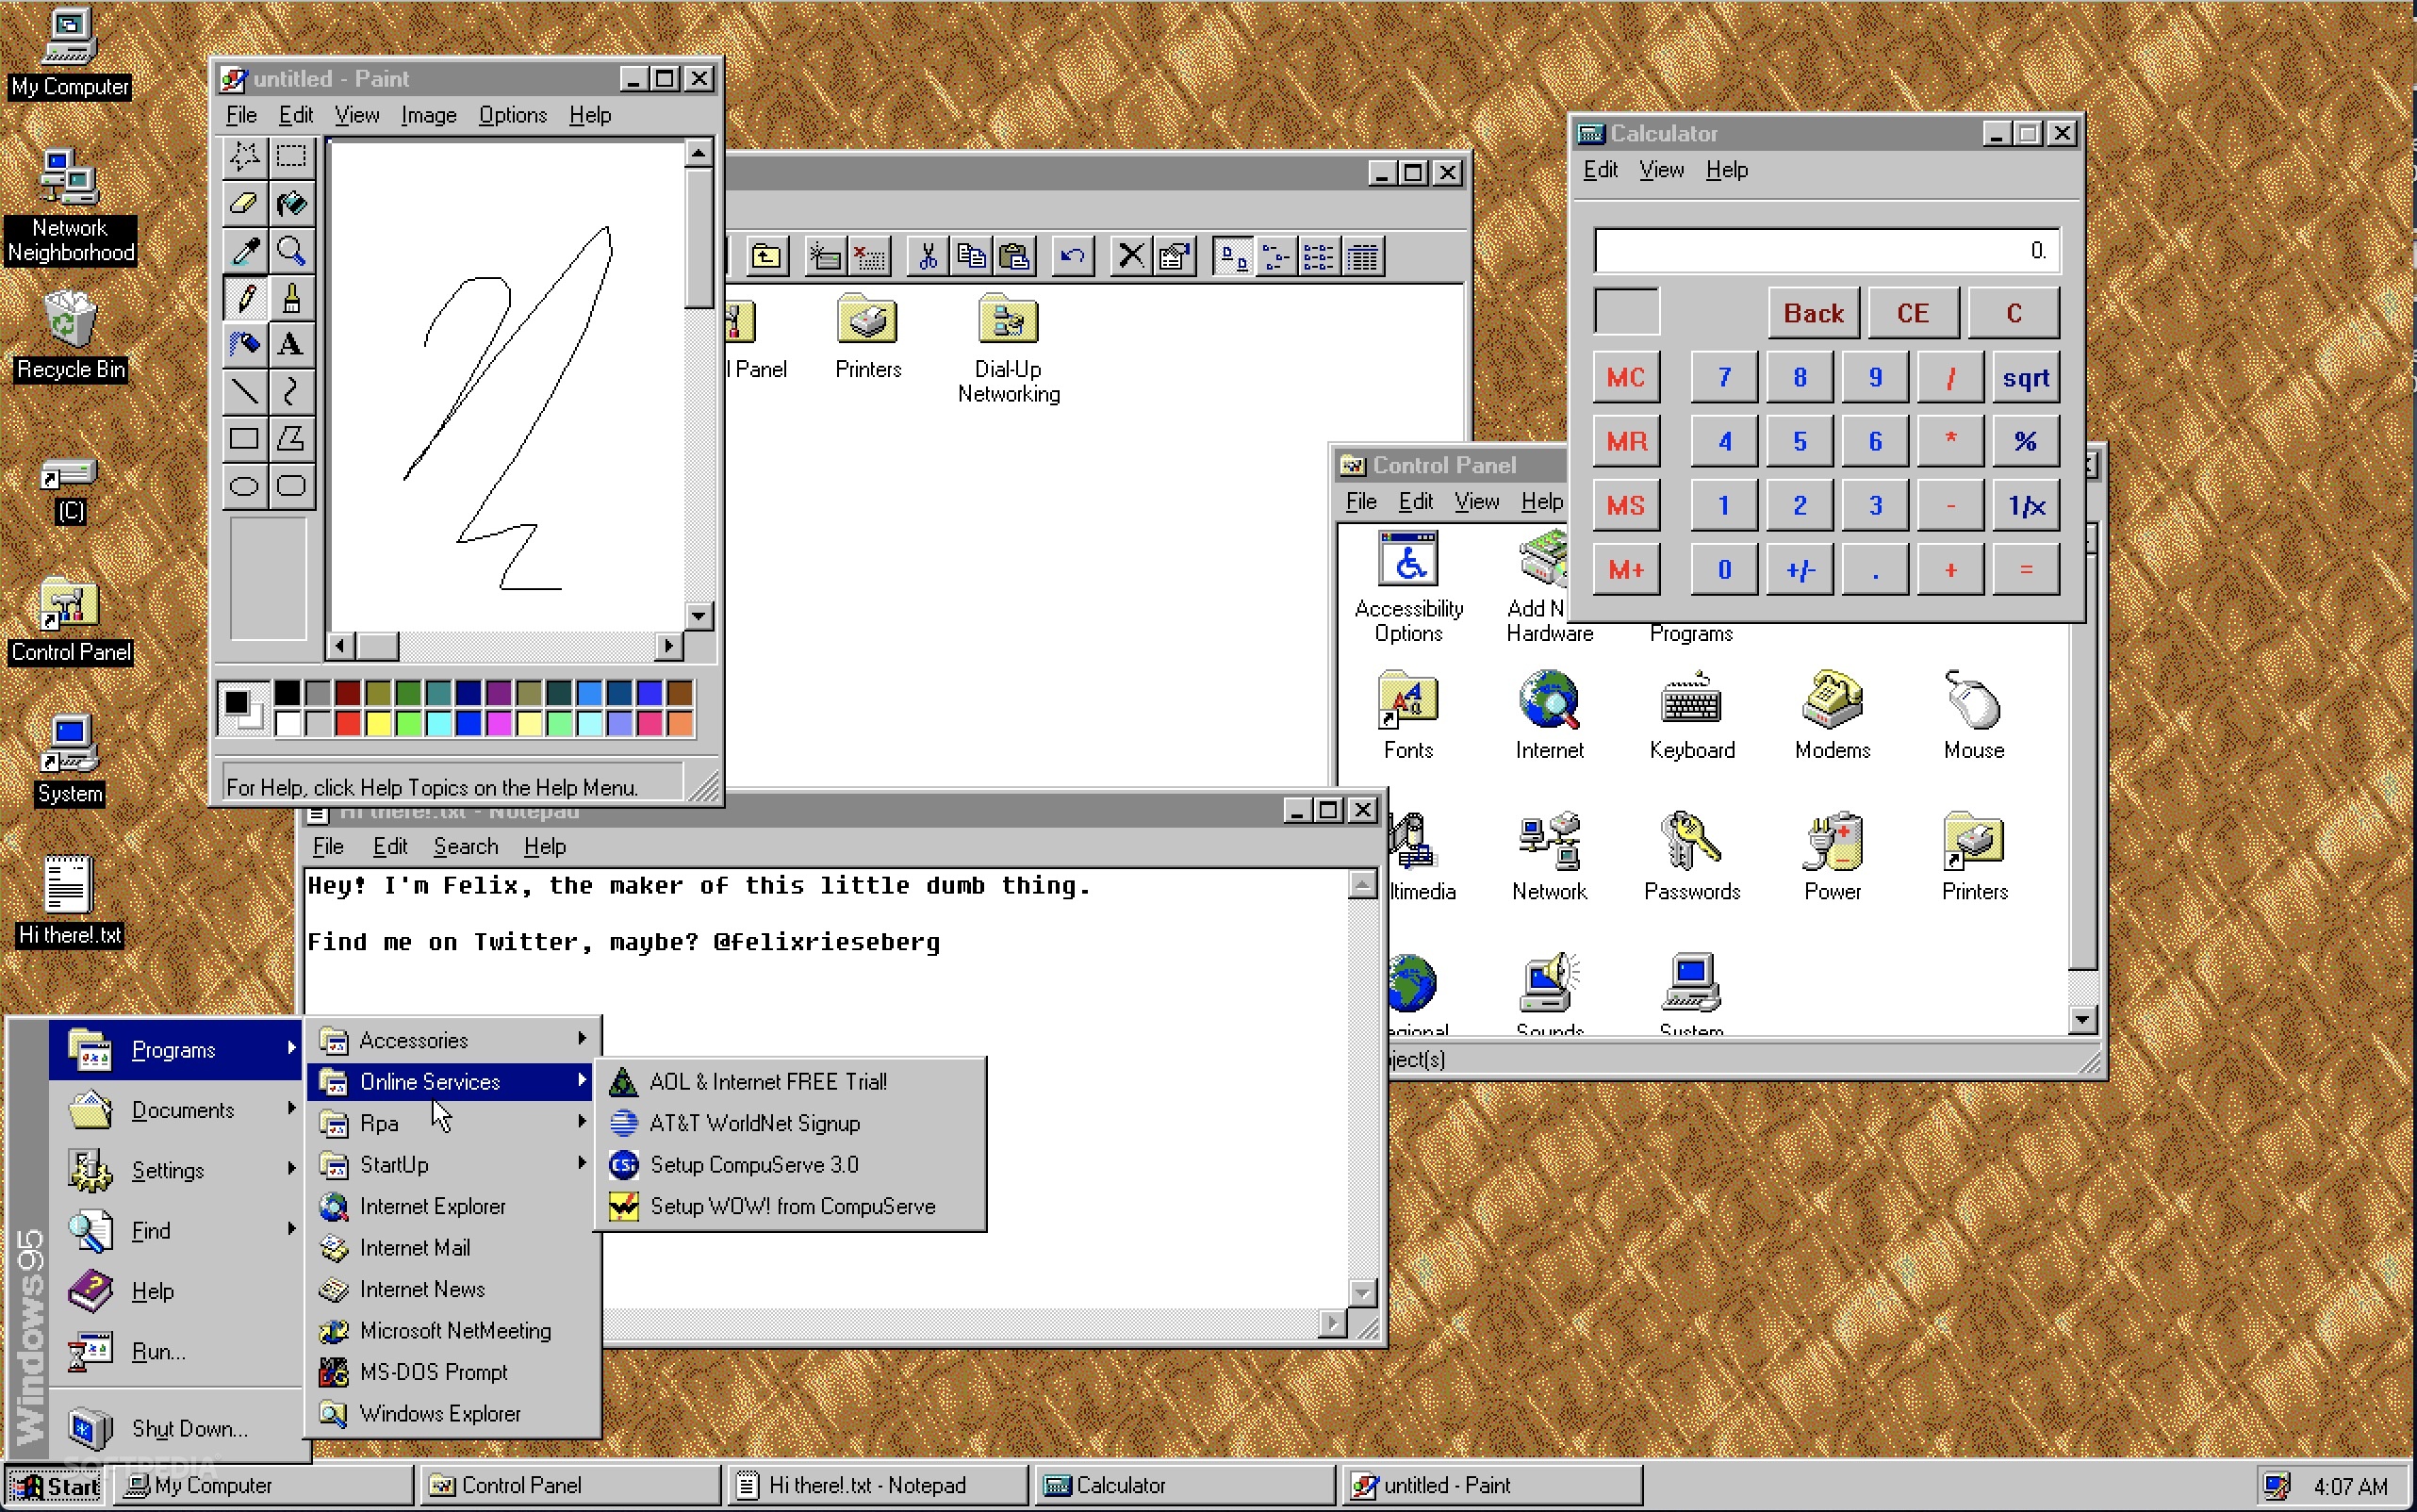 windows-95-is-now-available-on-linux-mac-and-windows-as-an-electron-app-522375-8.jpg